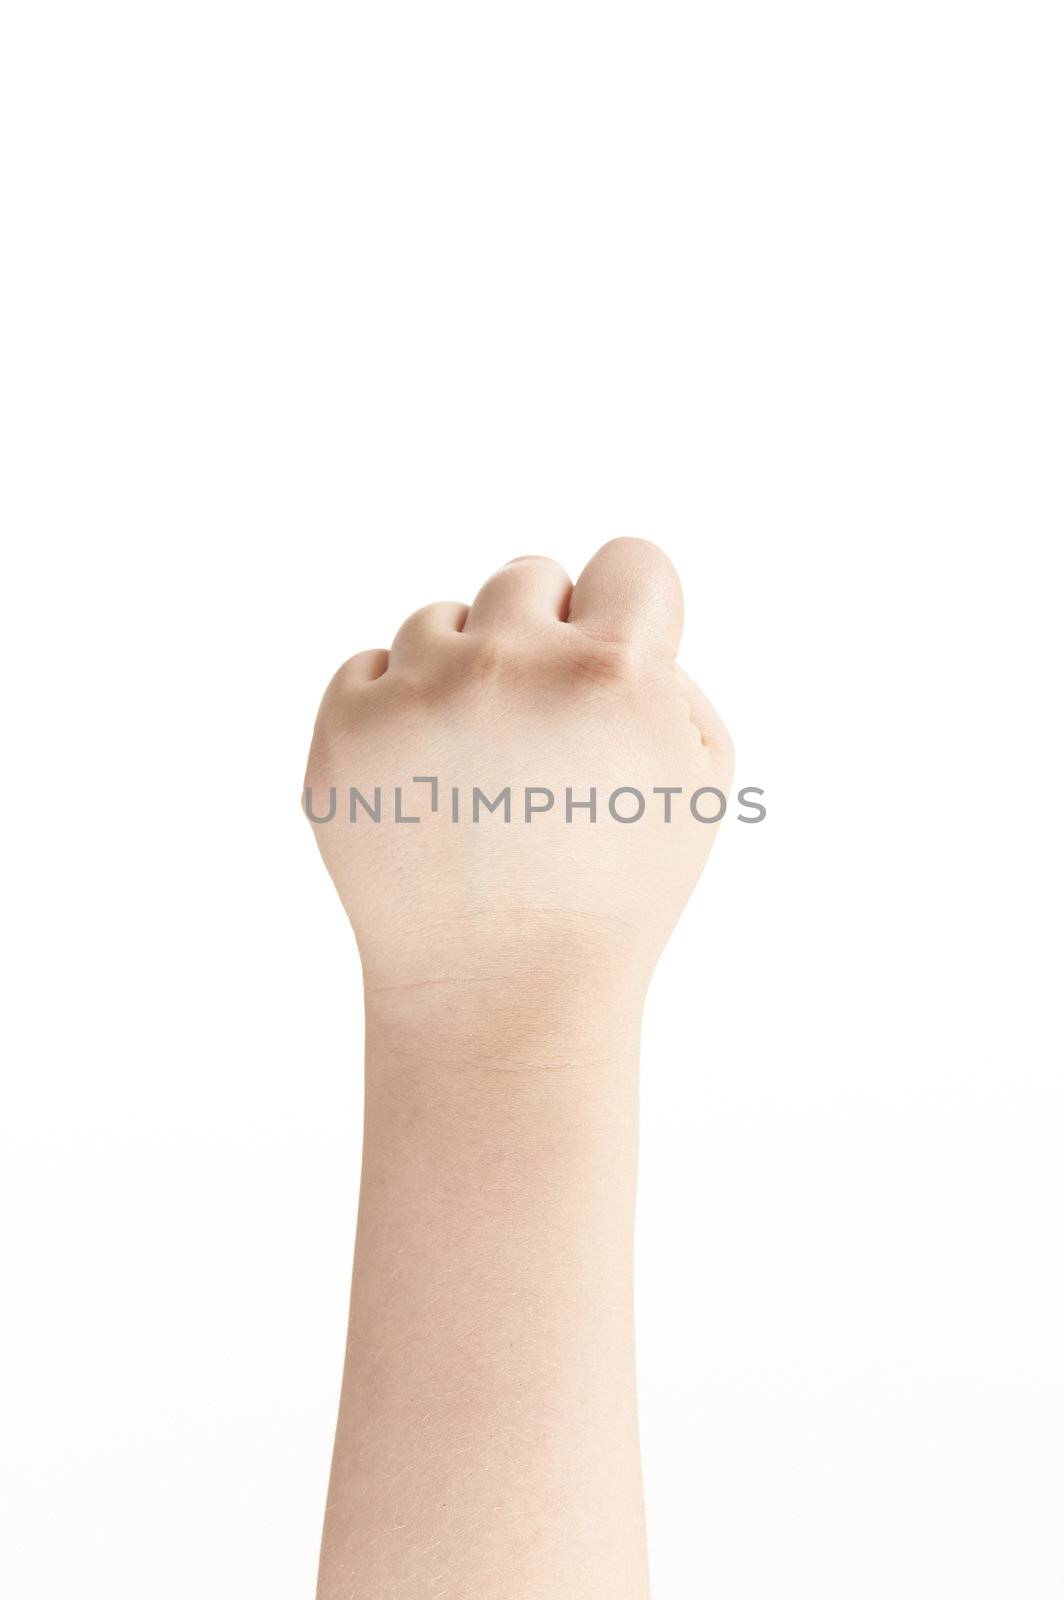 Clenched fist shown by childs hand by Eydfinnur